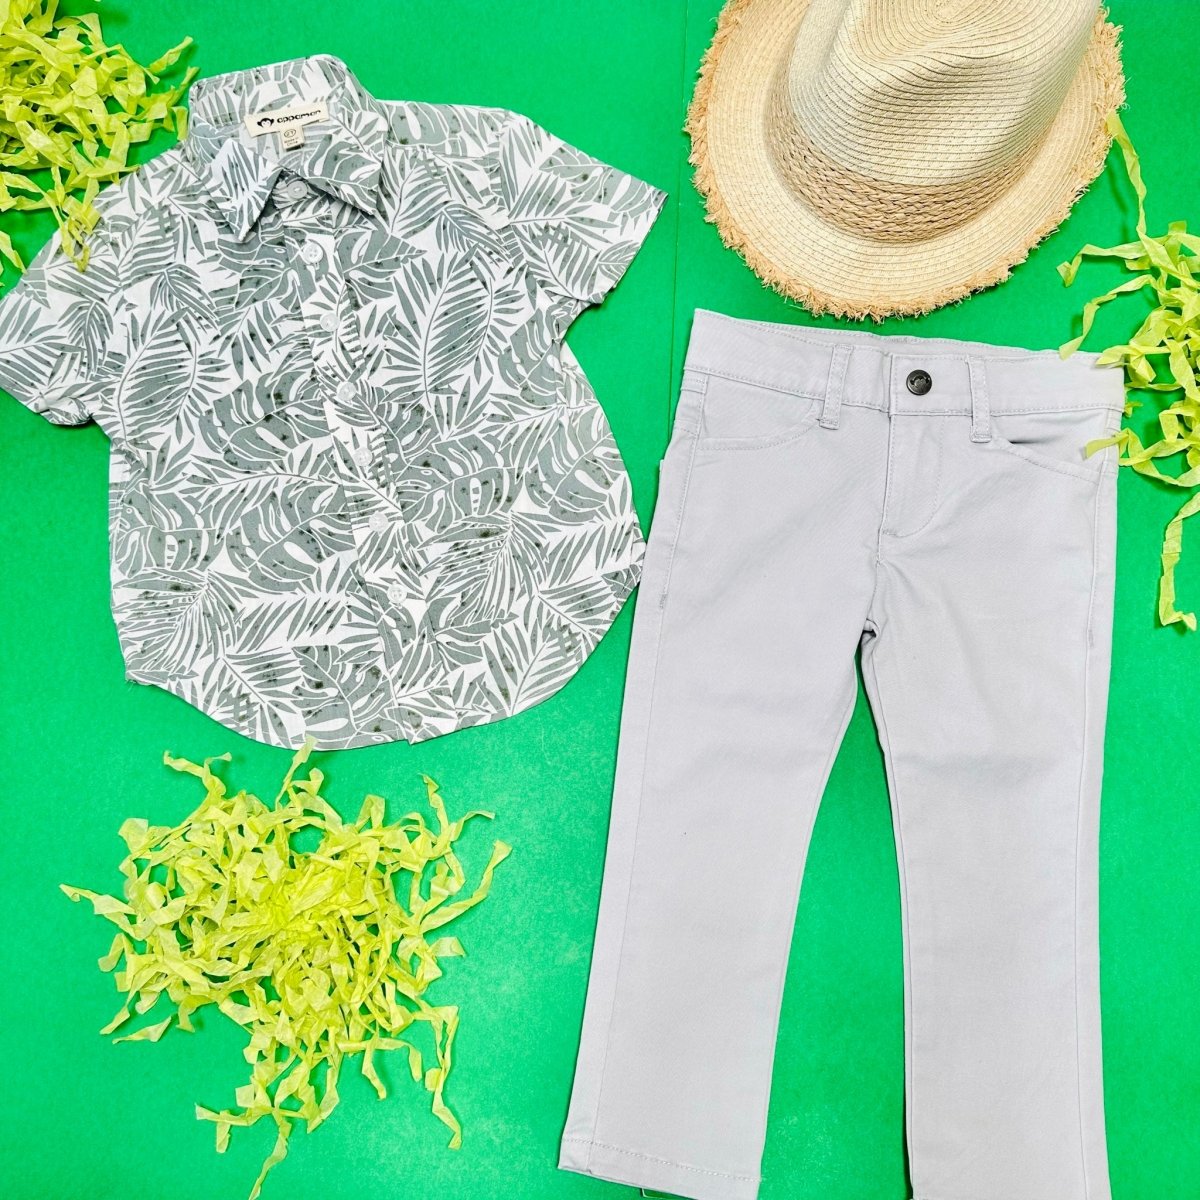 PALMS DAY PARTY BUTTON DOWN TOP - BUTTON DOWNS